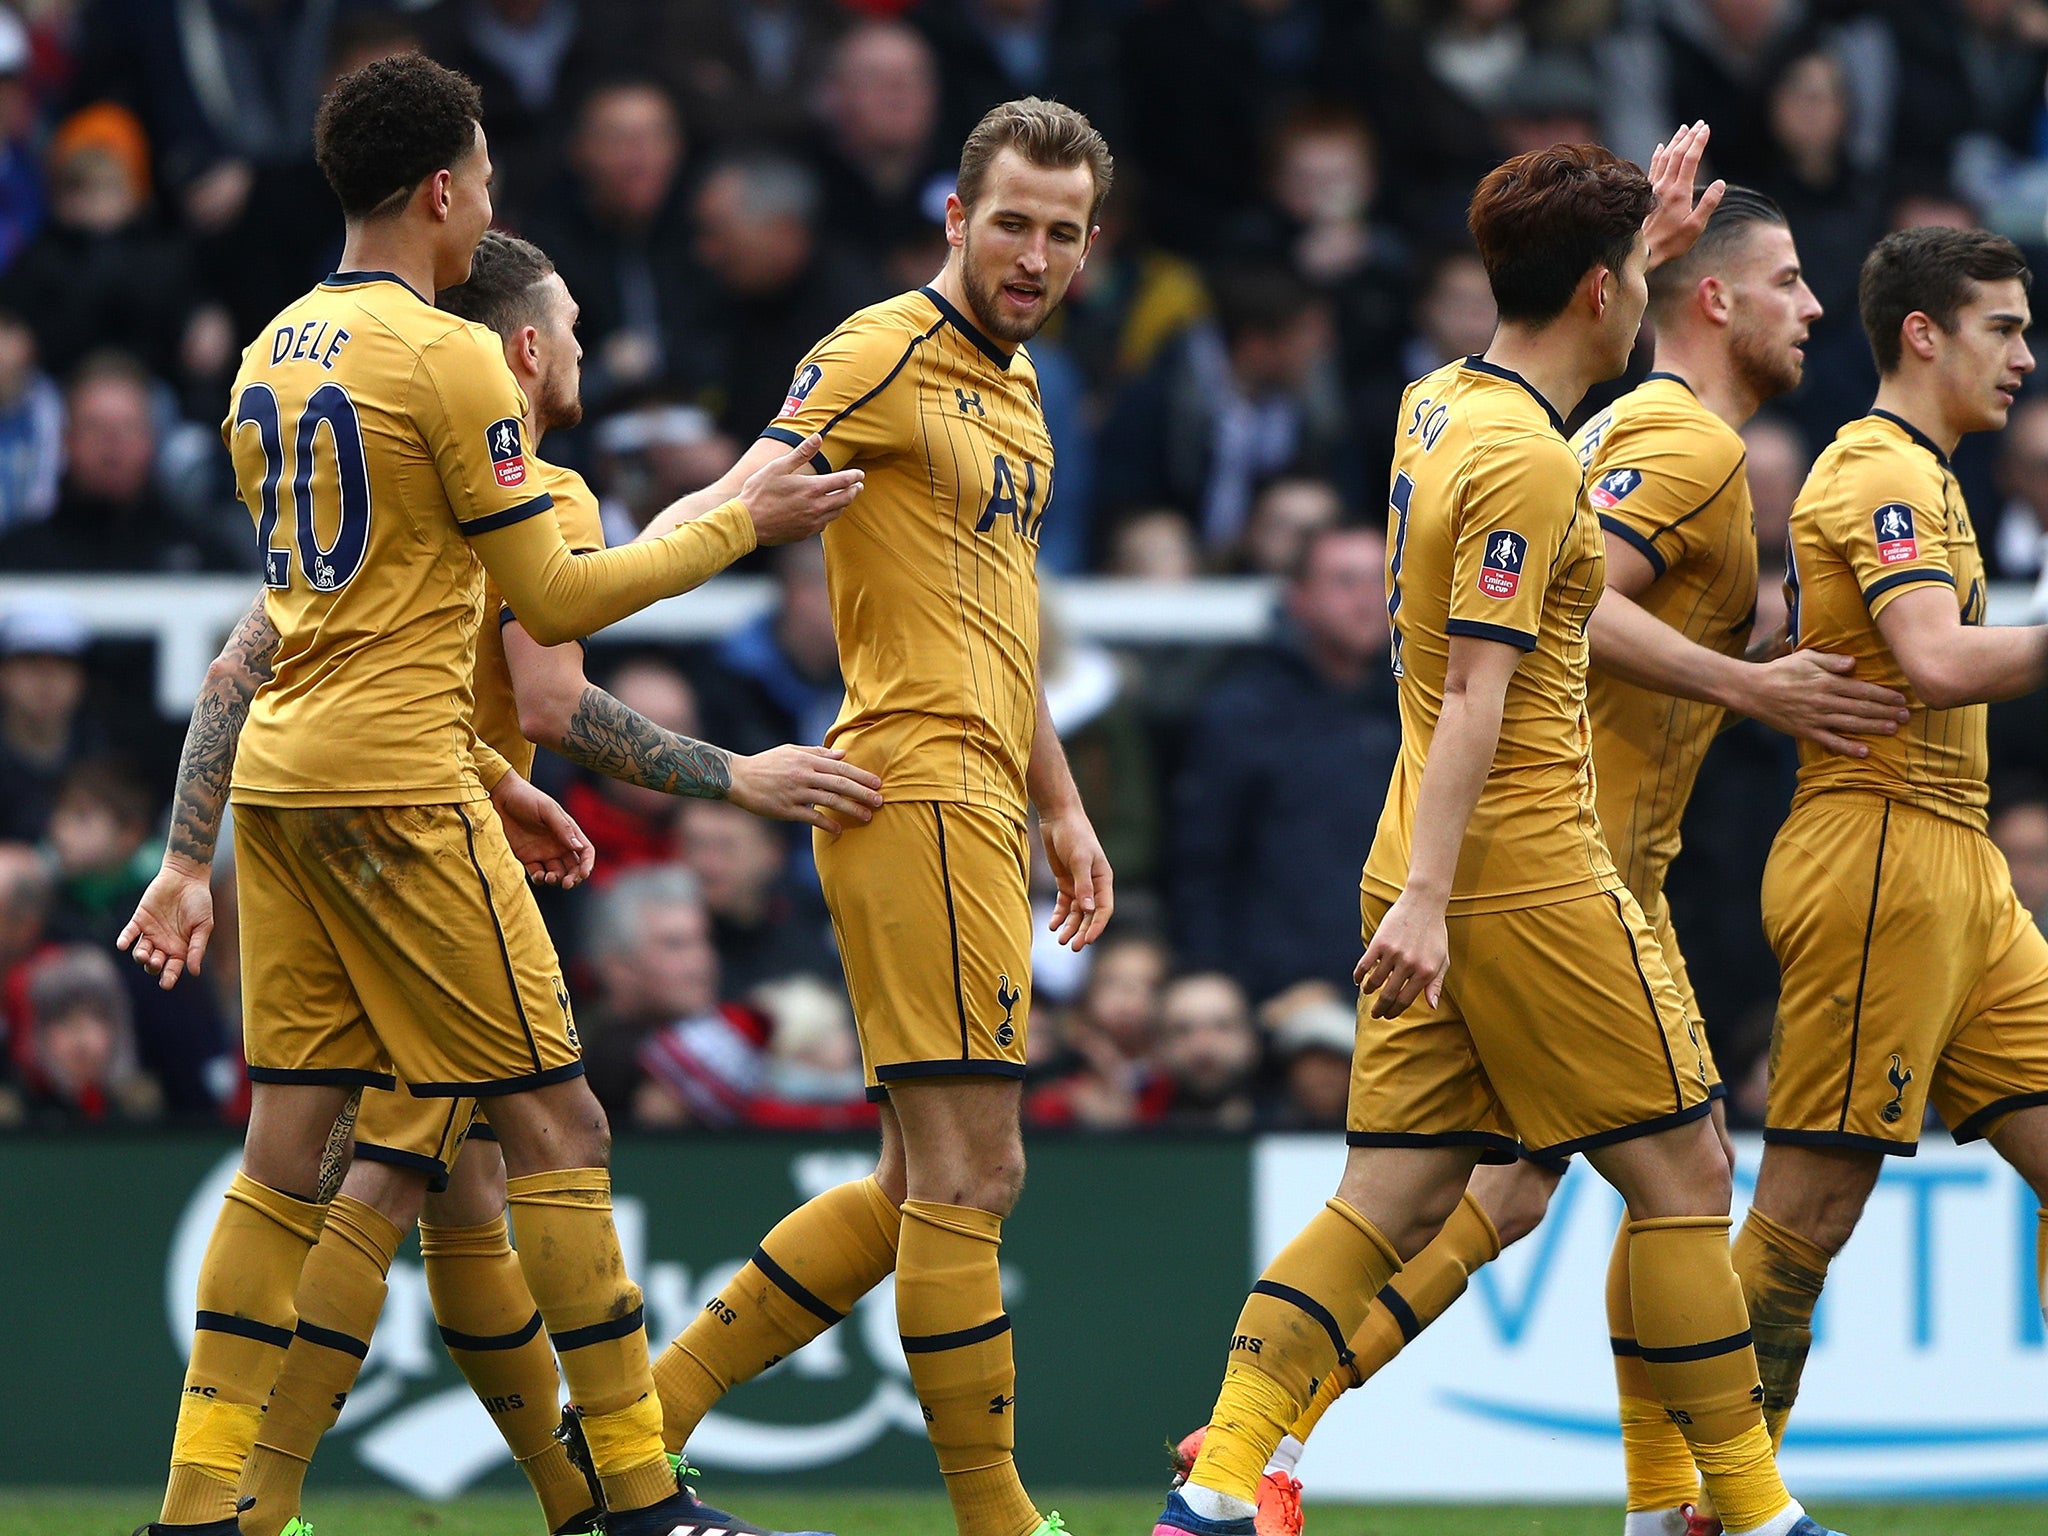 Harry Kane scored his second hat-trick of 2017 in Sunday's win at Craven Cottagearroll rounded off the visitors' win late on